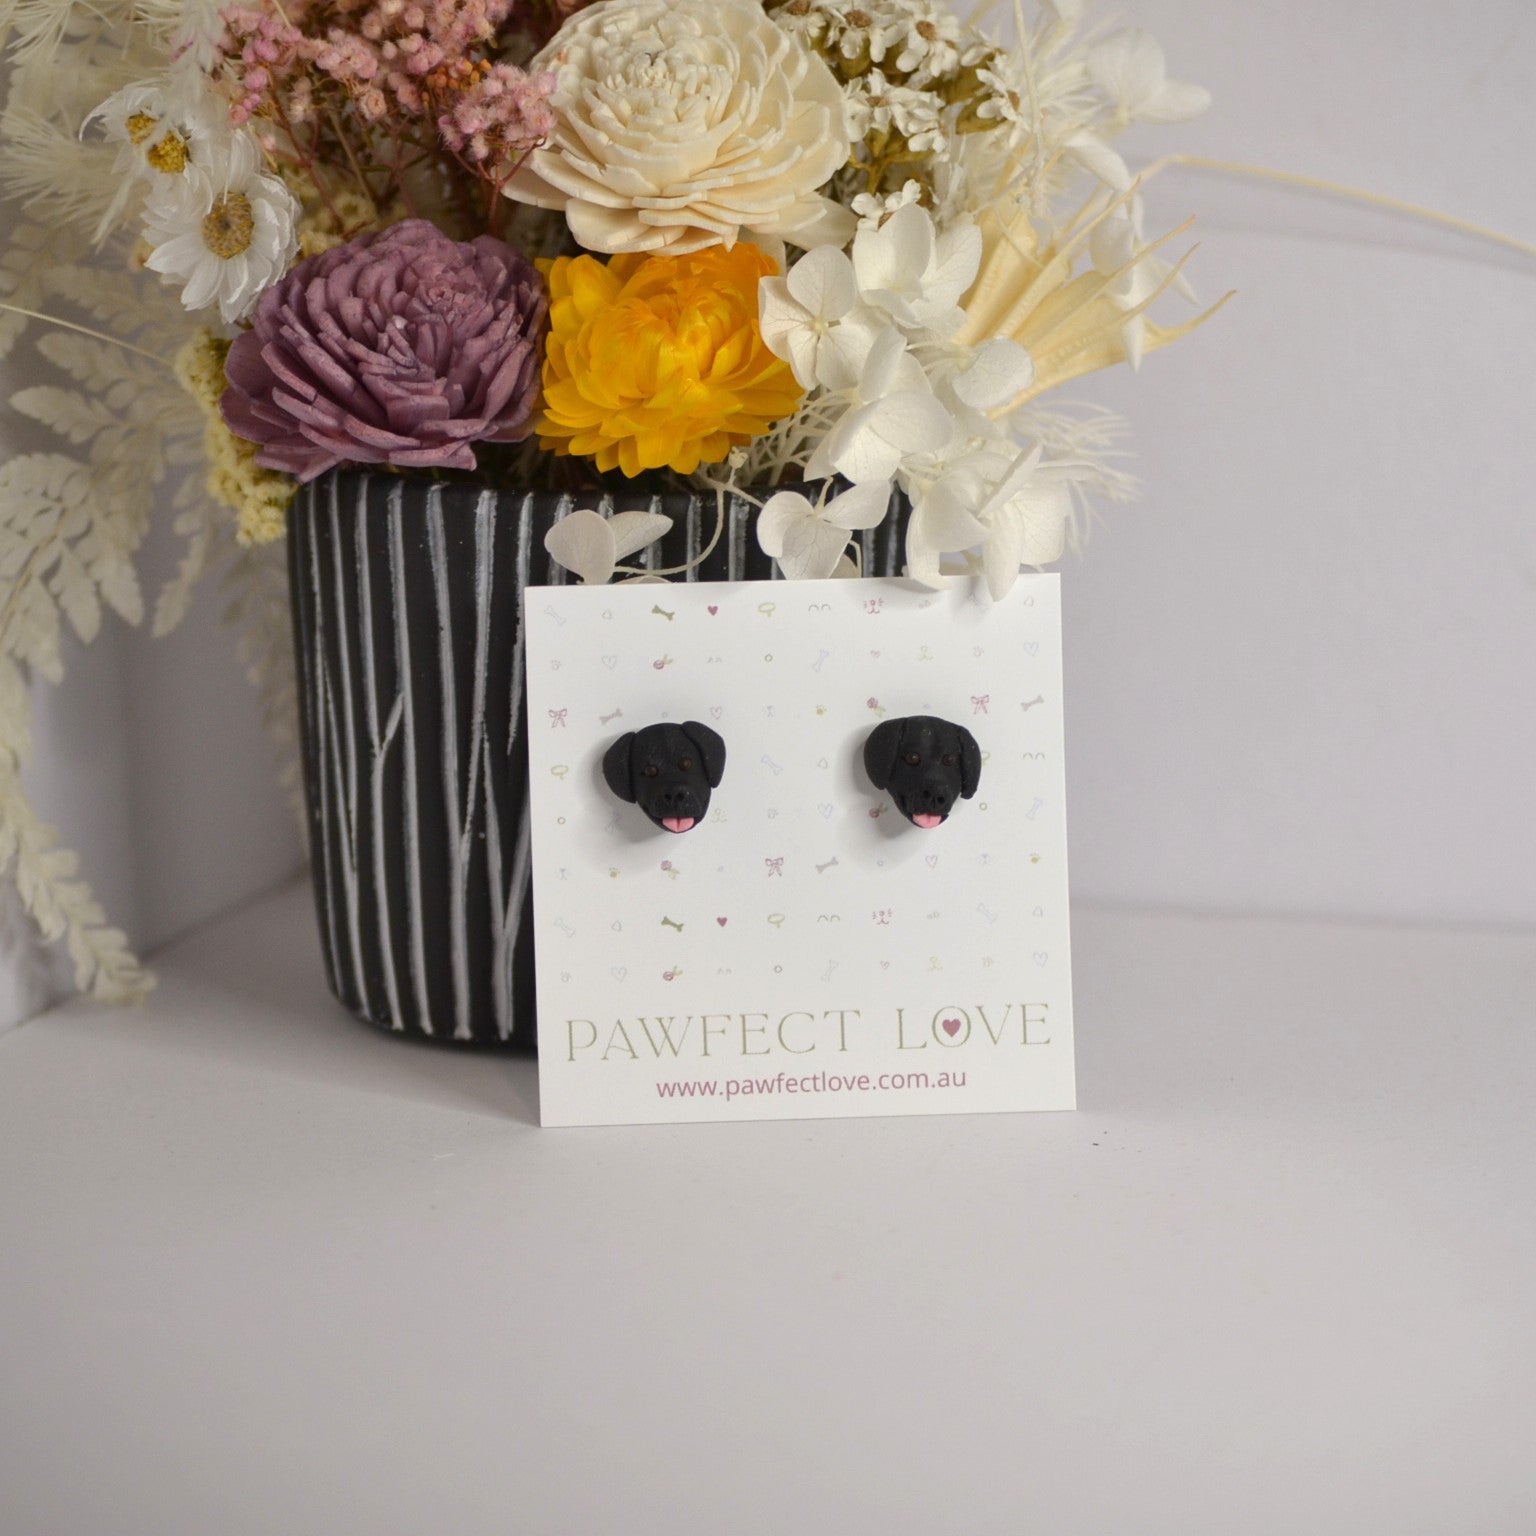 Handmade black labrador stud earrings by Pawfect Love, positioned in front of dried flower arrangement